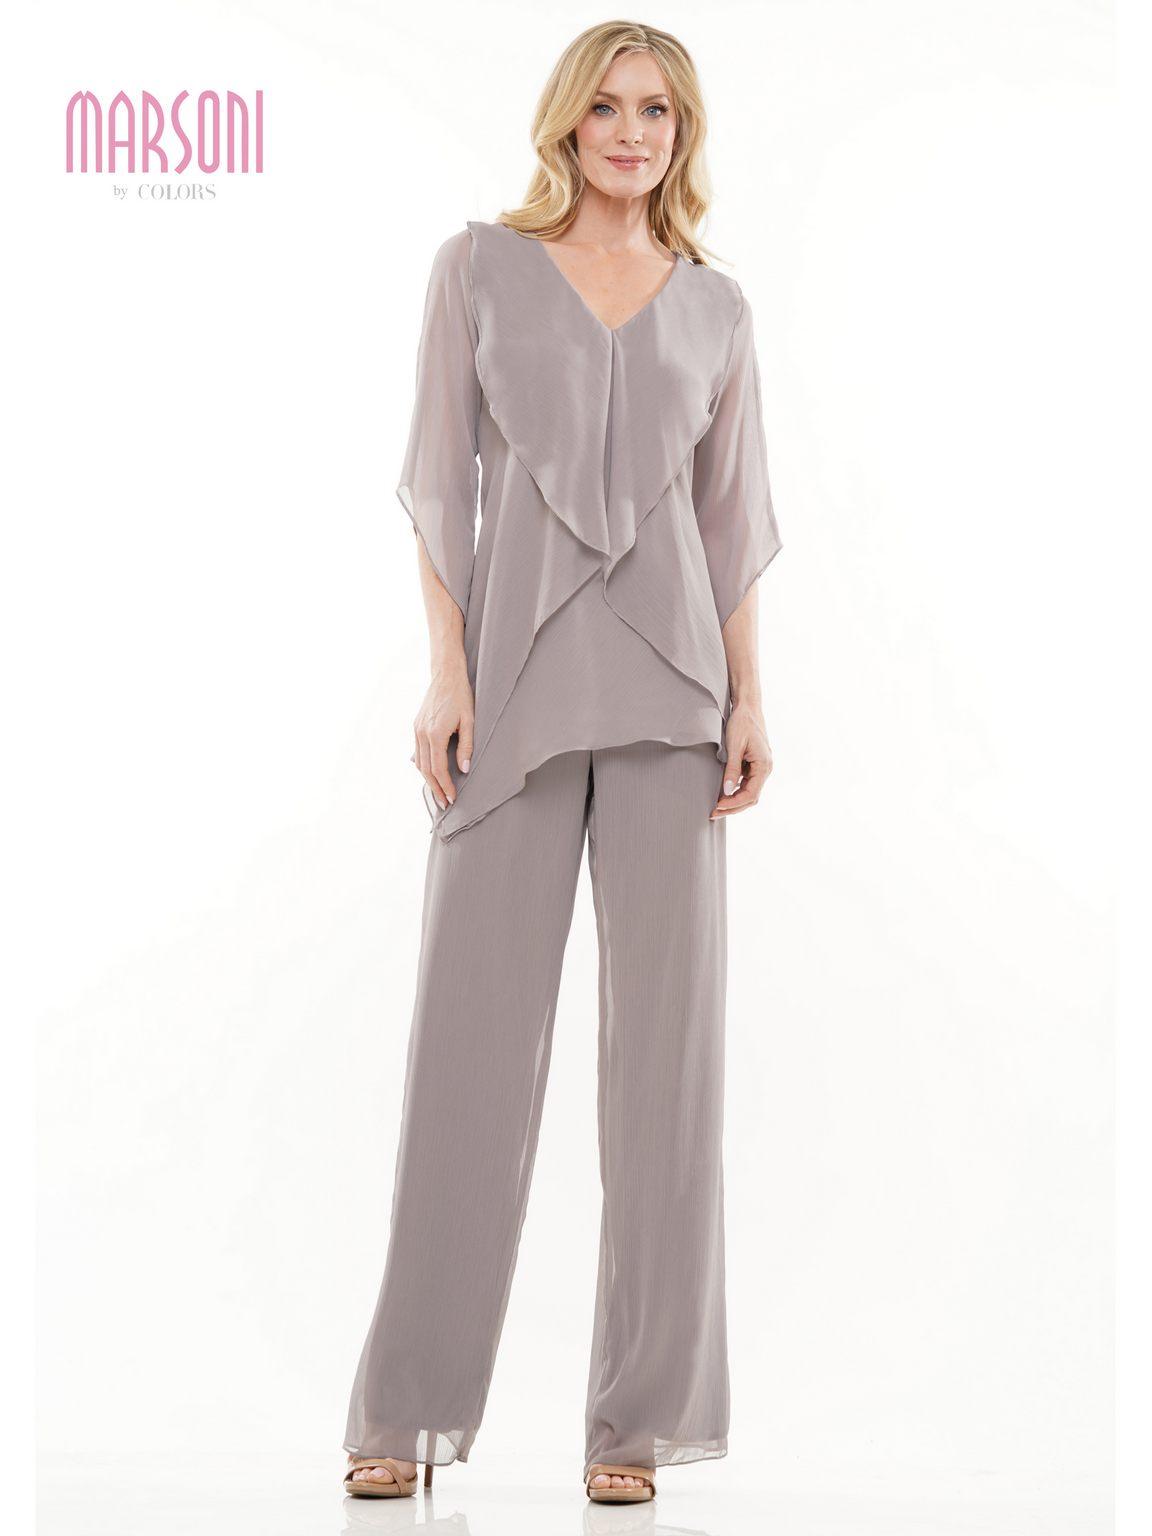 Marsoni Formal Mother of the Bride Pant Suit 308